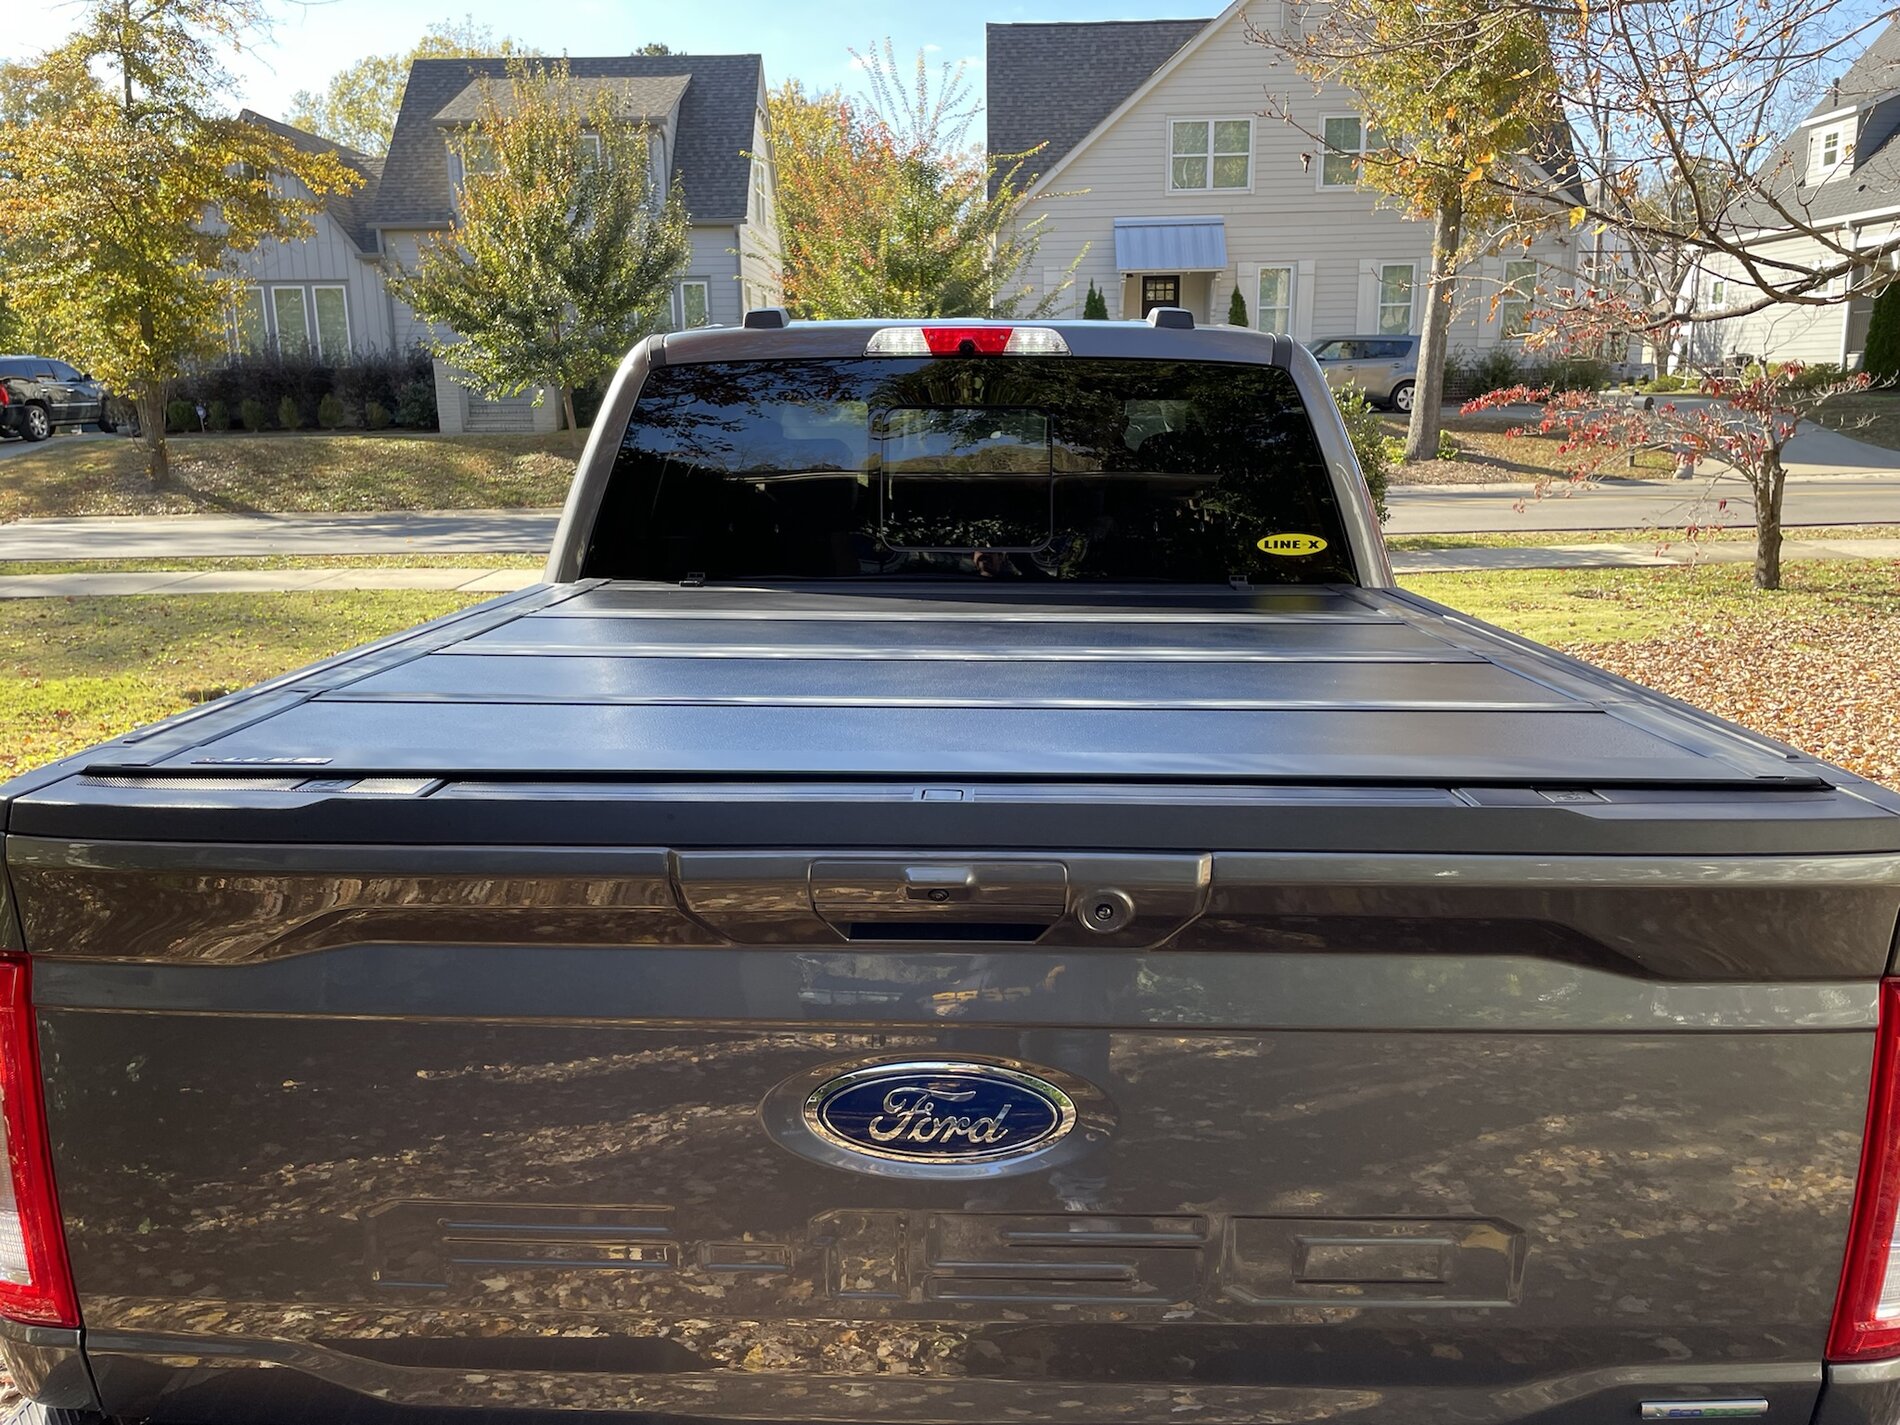 Ford F-150 Lightning Leer HF650M Tonneau Cover Review with Photos! - Install & First Impressions IMG_6476.JPEG